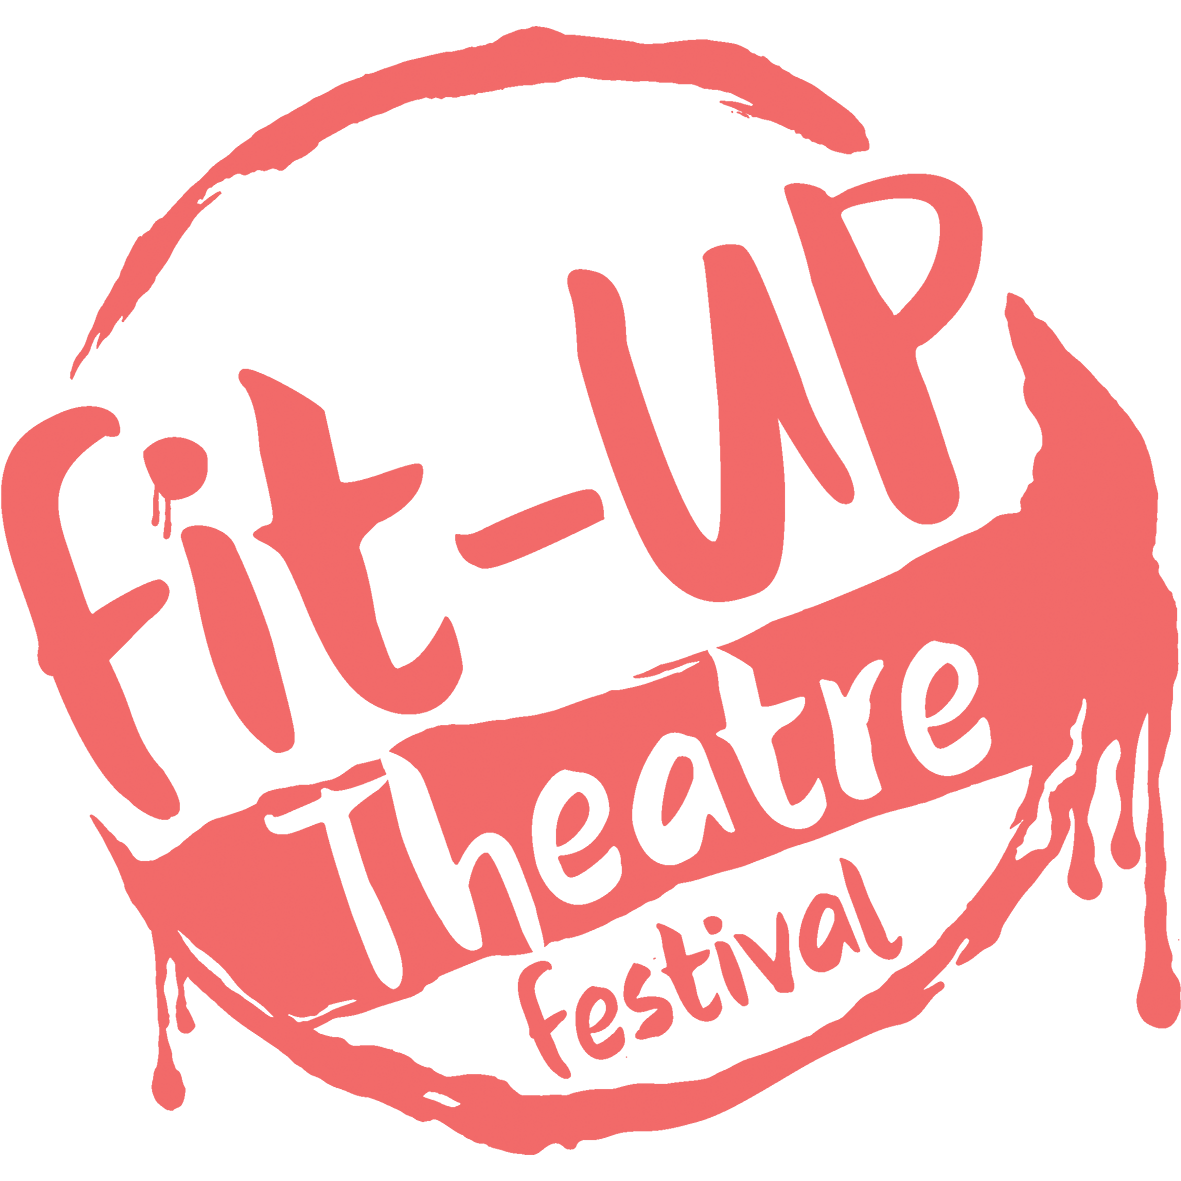 Fit-Up Theatre Festival